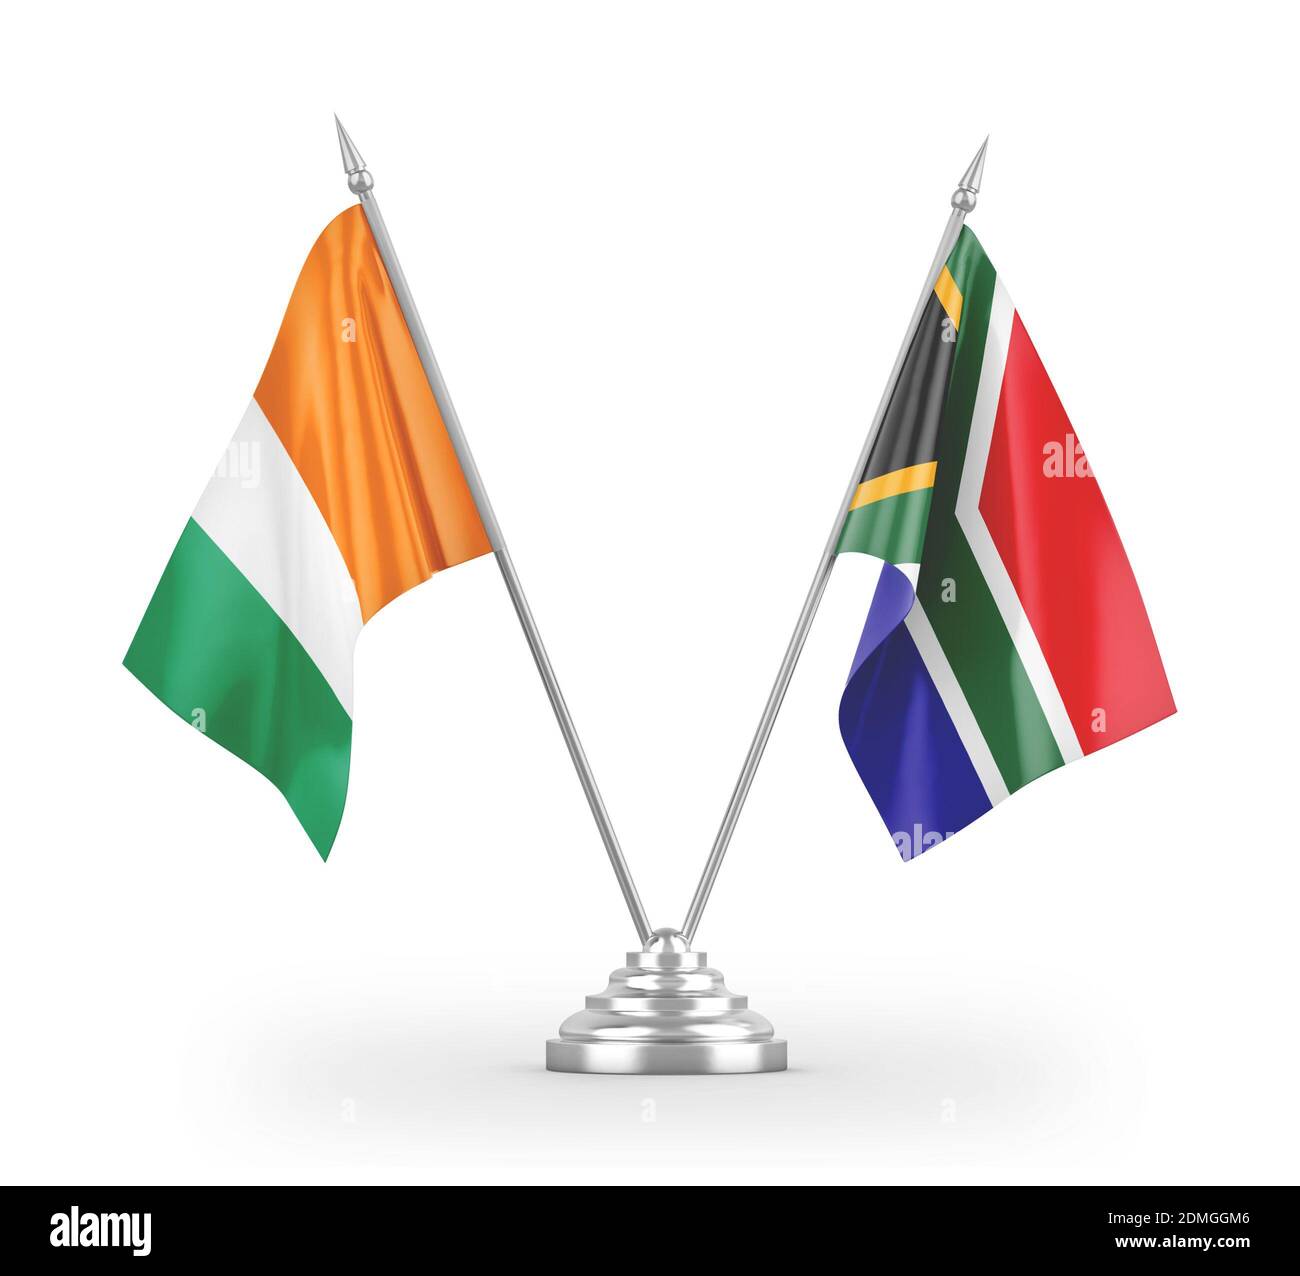 South Africa and Cote d'Ivoire Ivory coast table flags isolated on